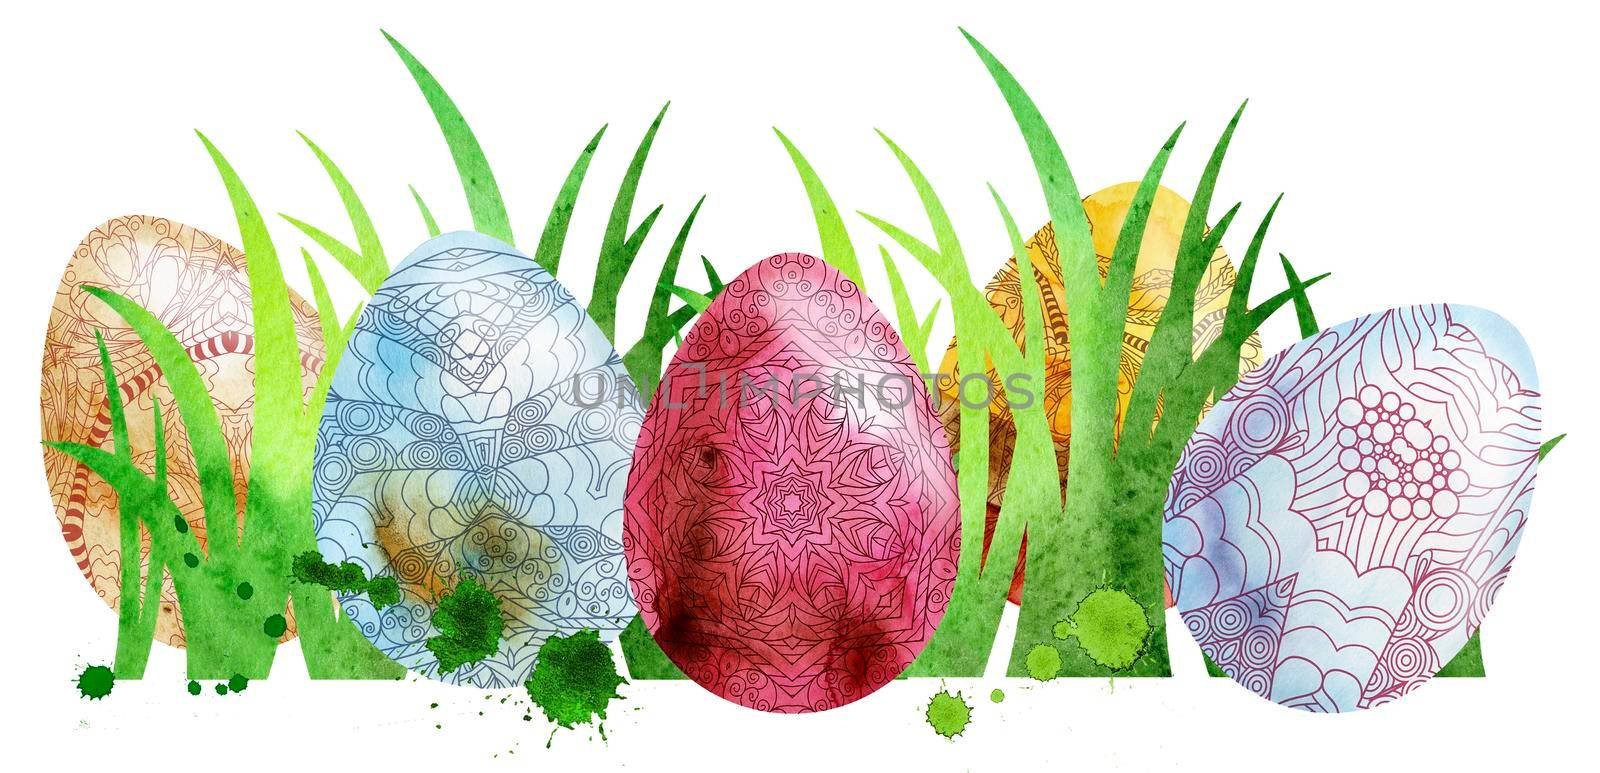 Watercolor Easter colored eggs and green grass on white background. Design element for greeting cards, note cards and invitations.